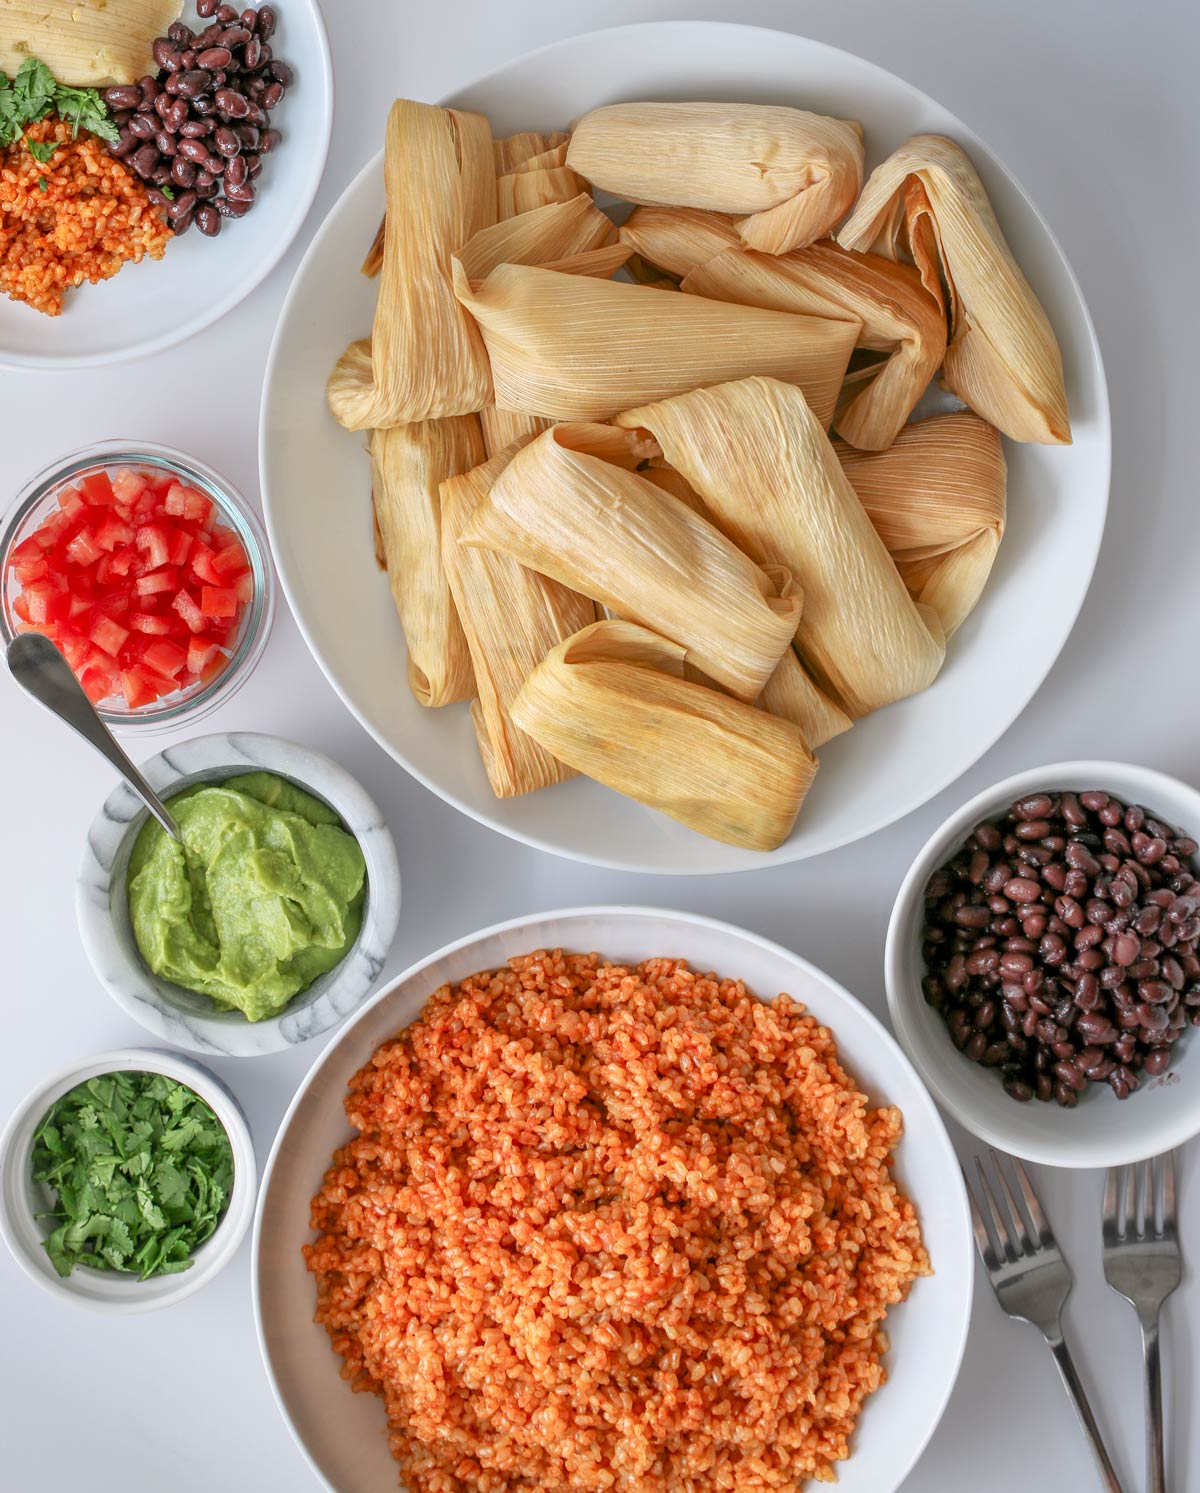 table set with bowl of vegetarian tamales, side dishes, and condiments.